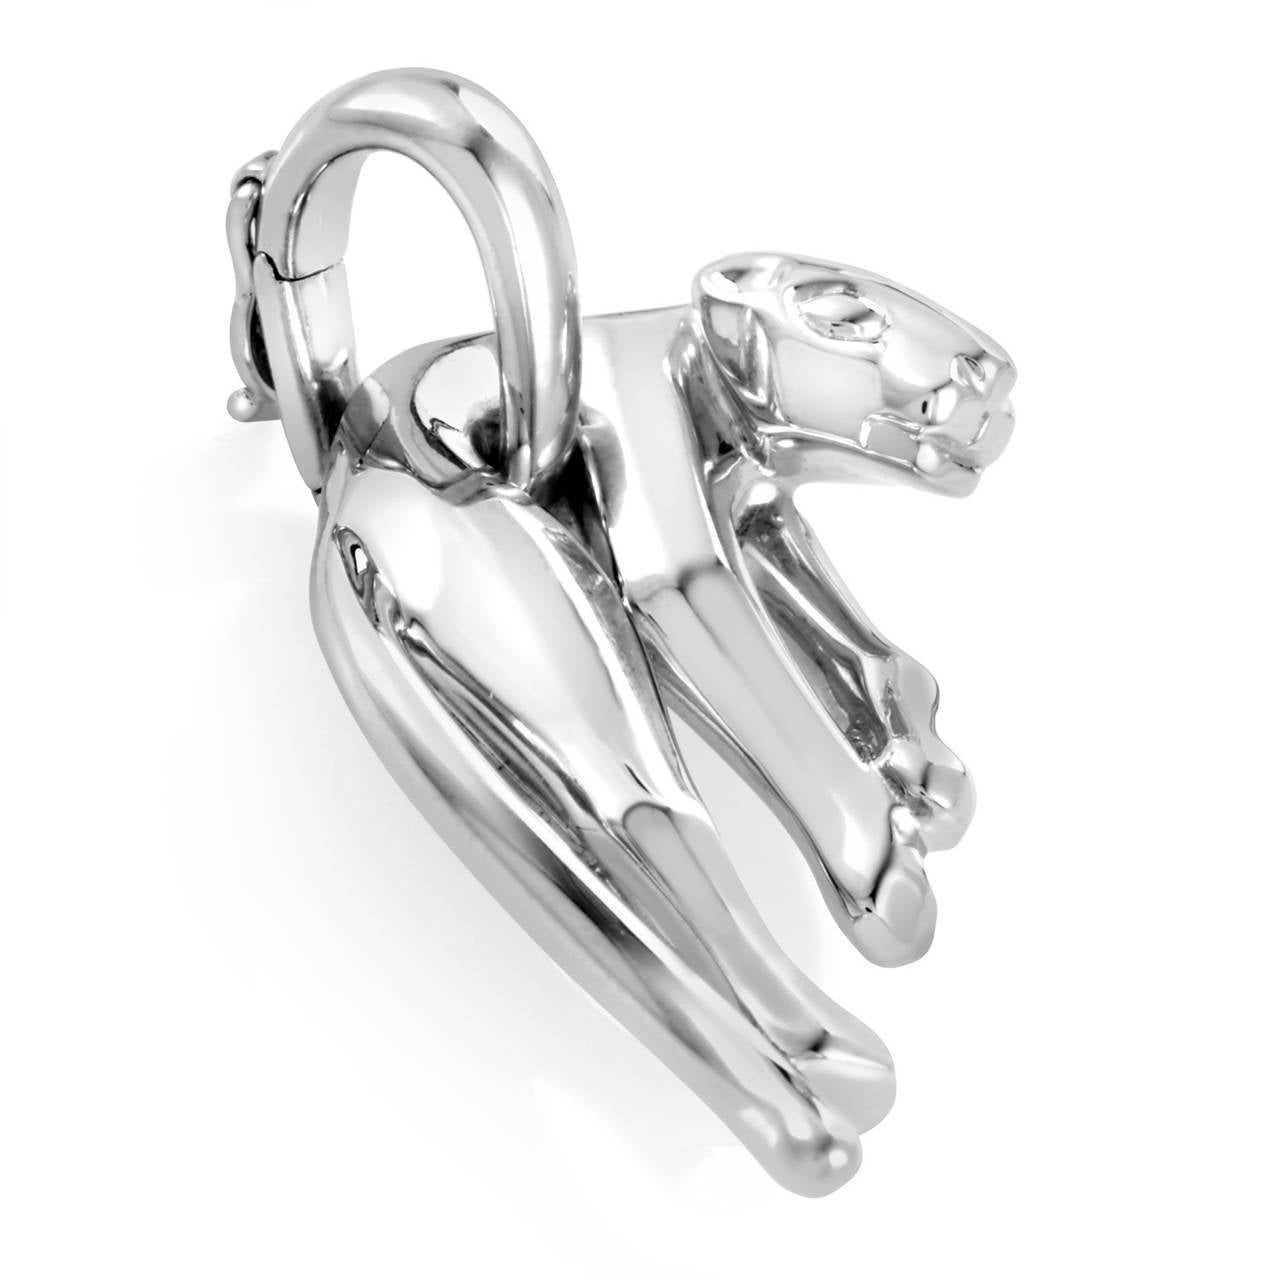 This piece from Cartier's famed Panthere collection is sure to turn heads, and garner much attention. The pendant is made of 18K white gold and is shaped like a panther.

Included Items: Manufacturer's Box and Papers